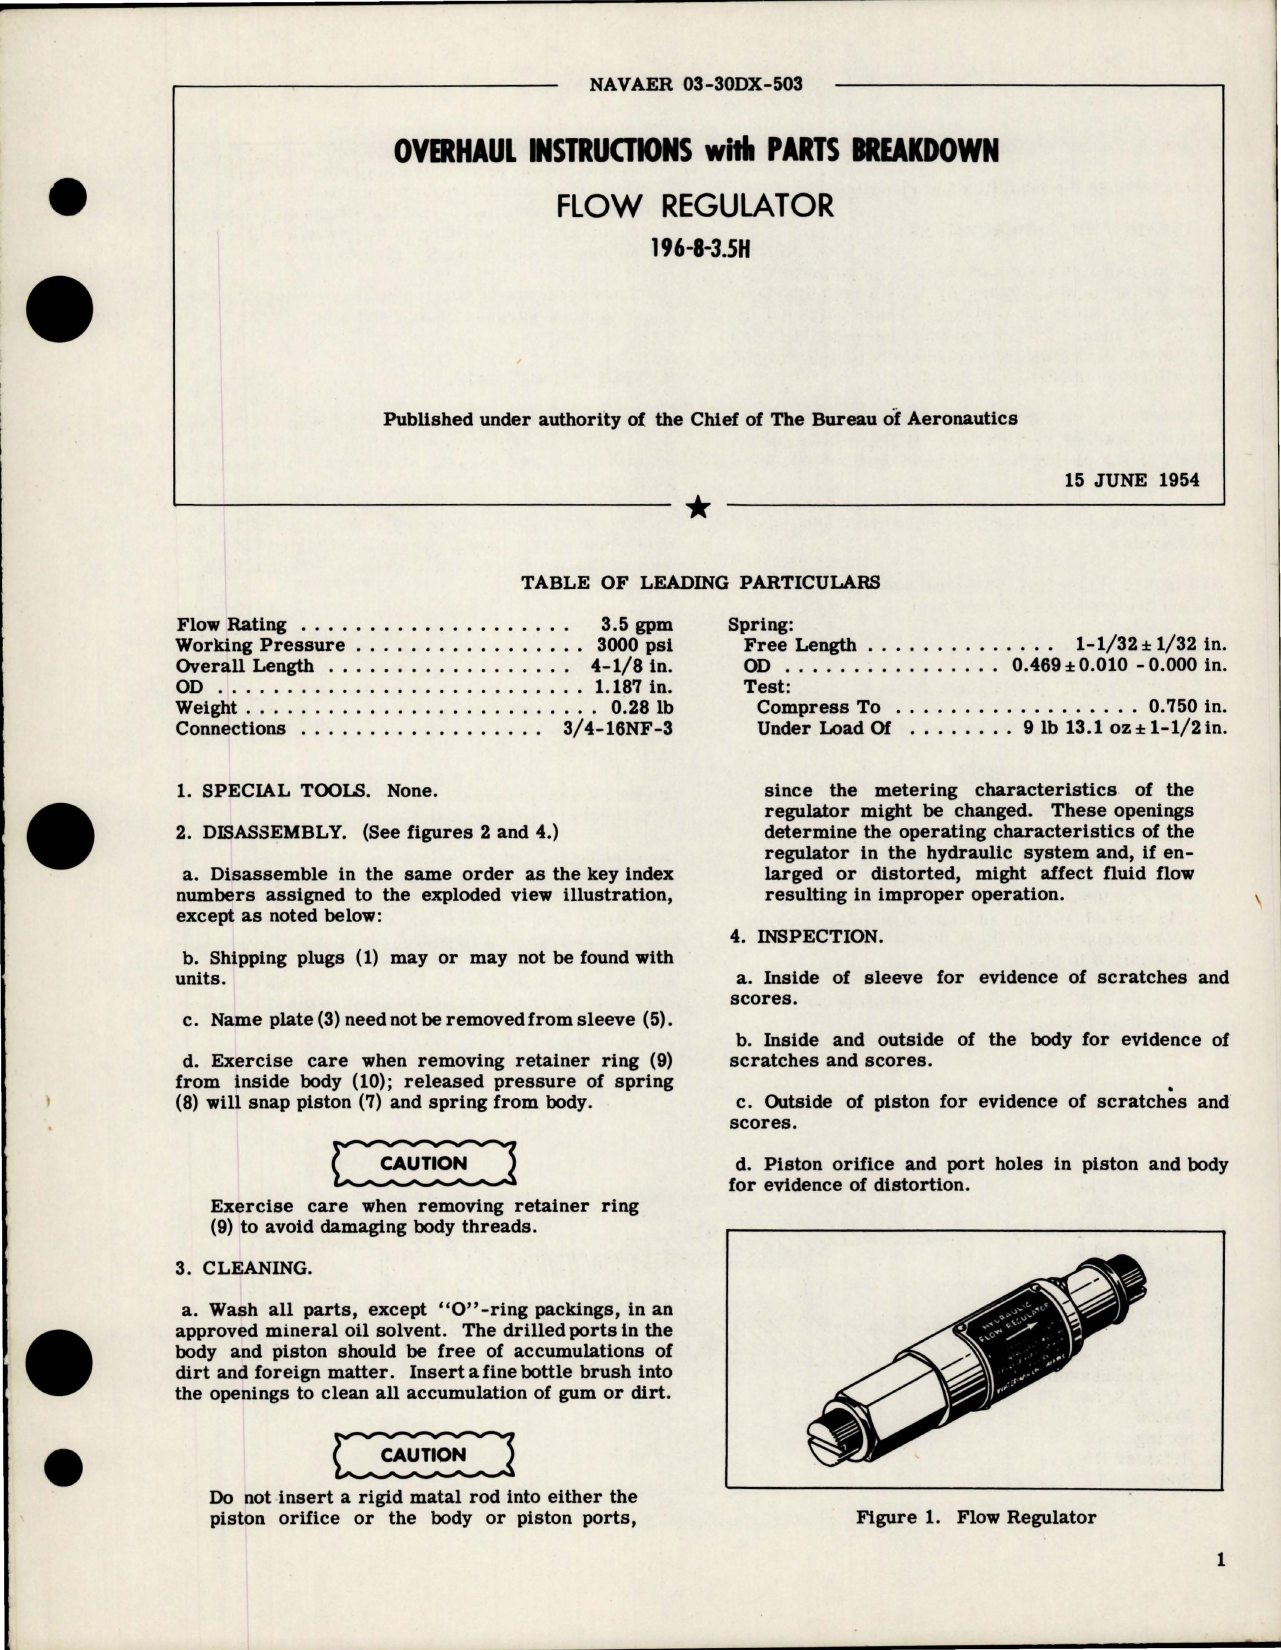 Sample page 1 from AirCorps Library document: Overhaul Instructions w Parts Breakdown for Flow Regulator - 196-8-3.5H